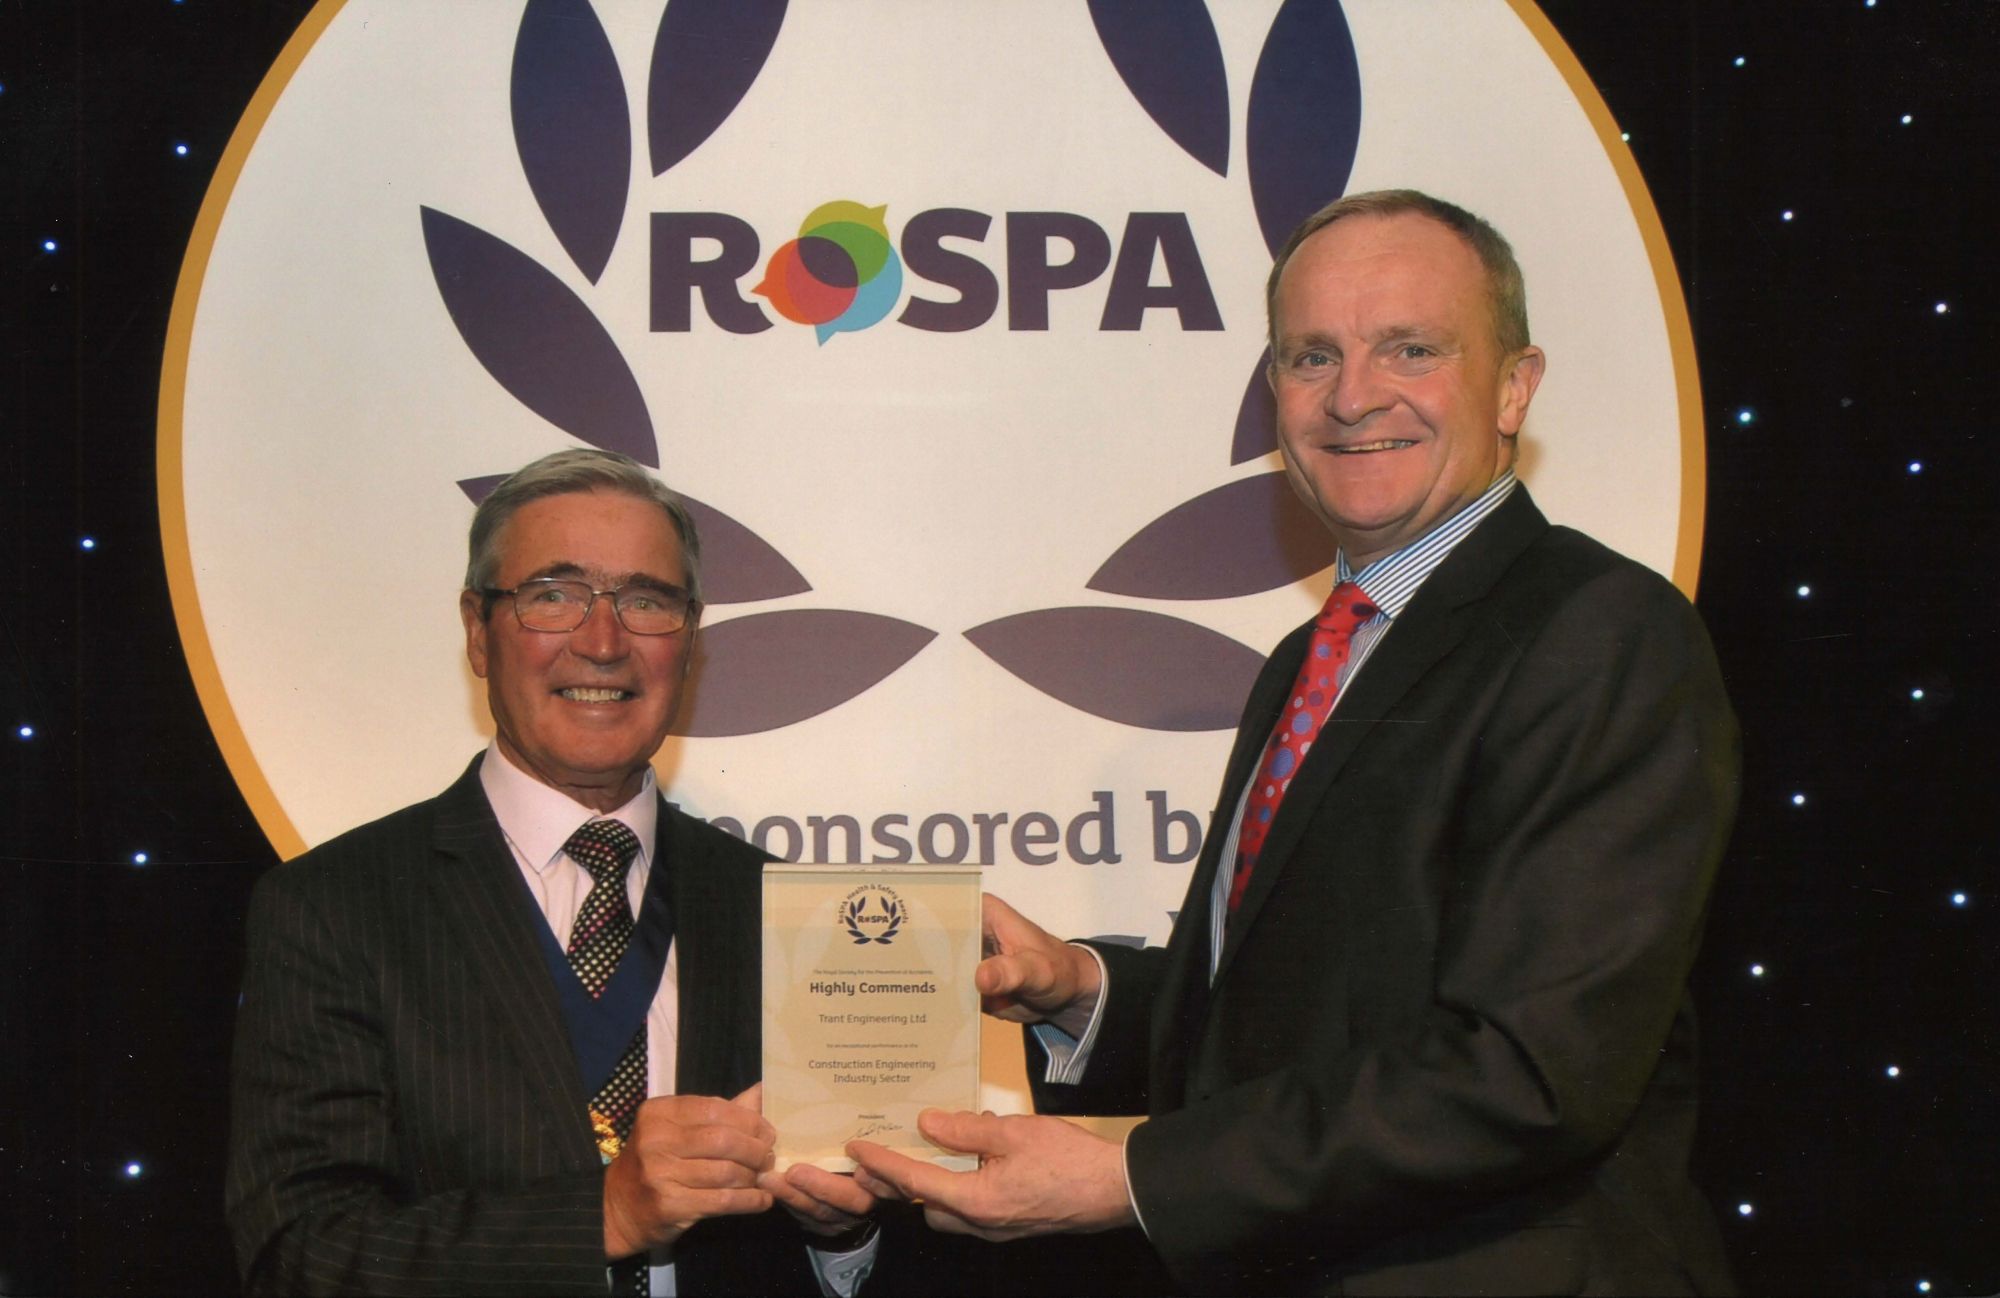 RoSPA Highly Commended Award 2019